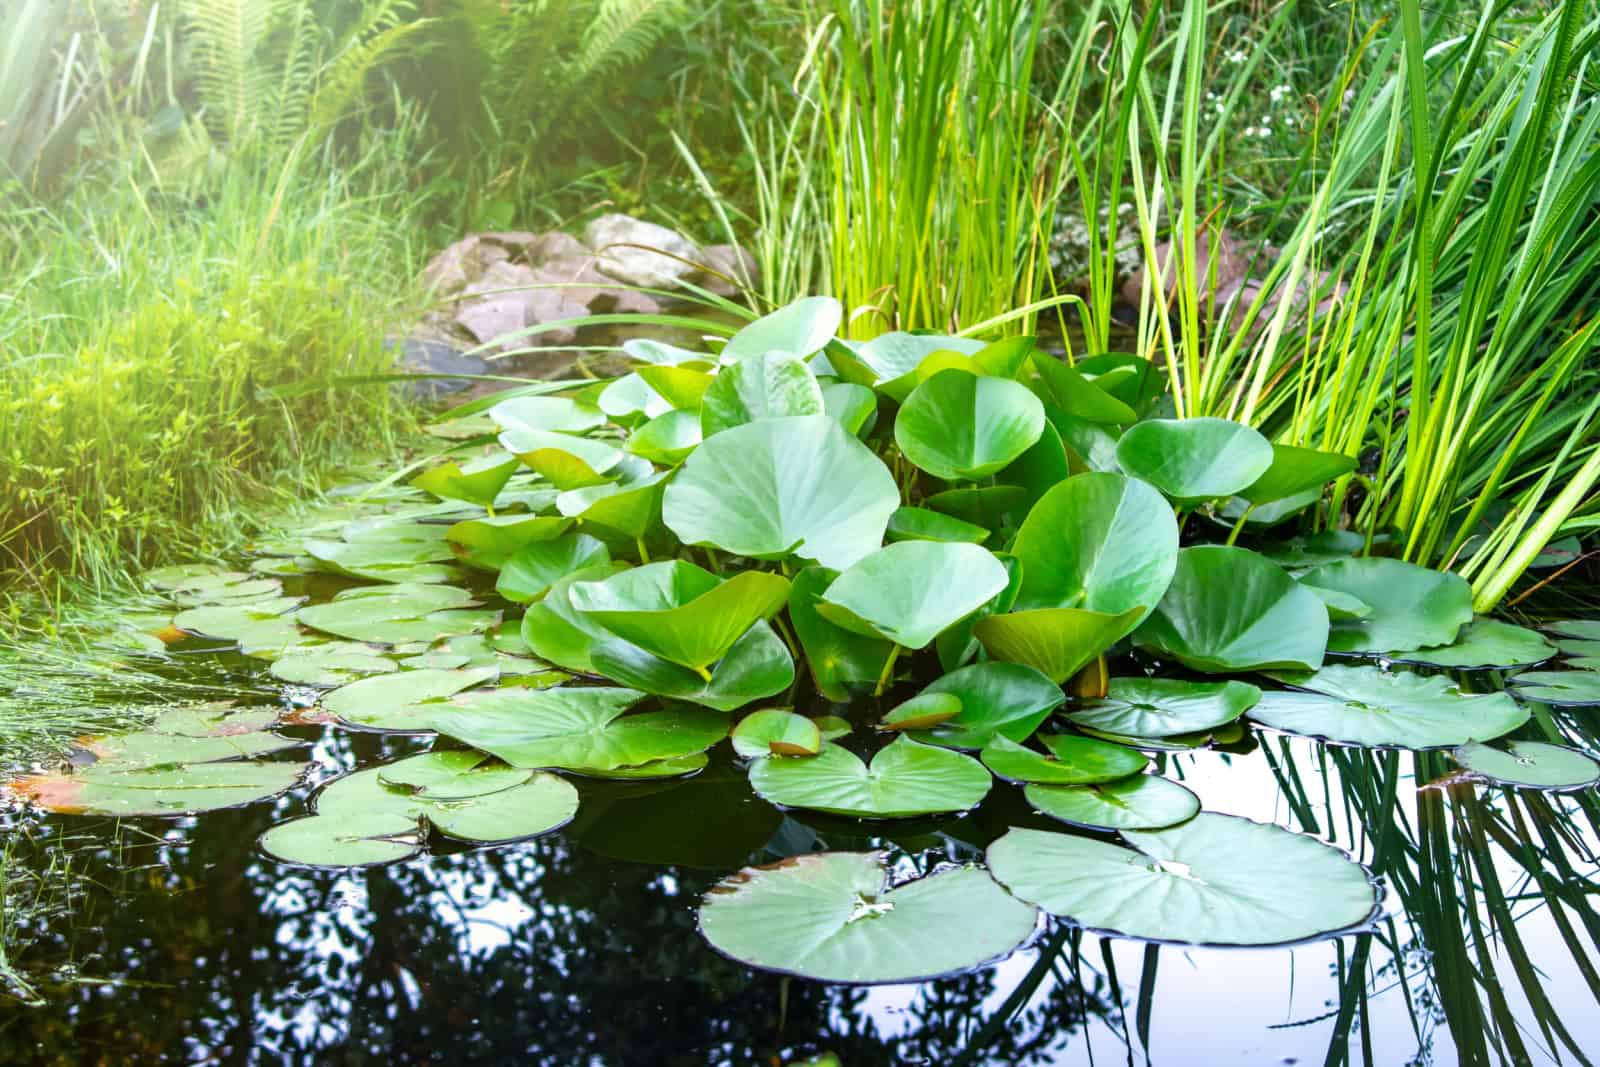 Artificial decorative pond in the garden with living aquatic plants